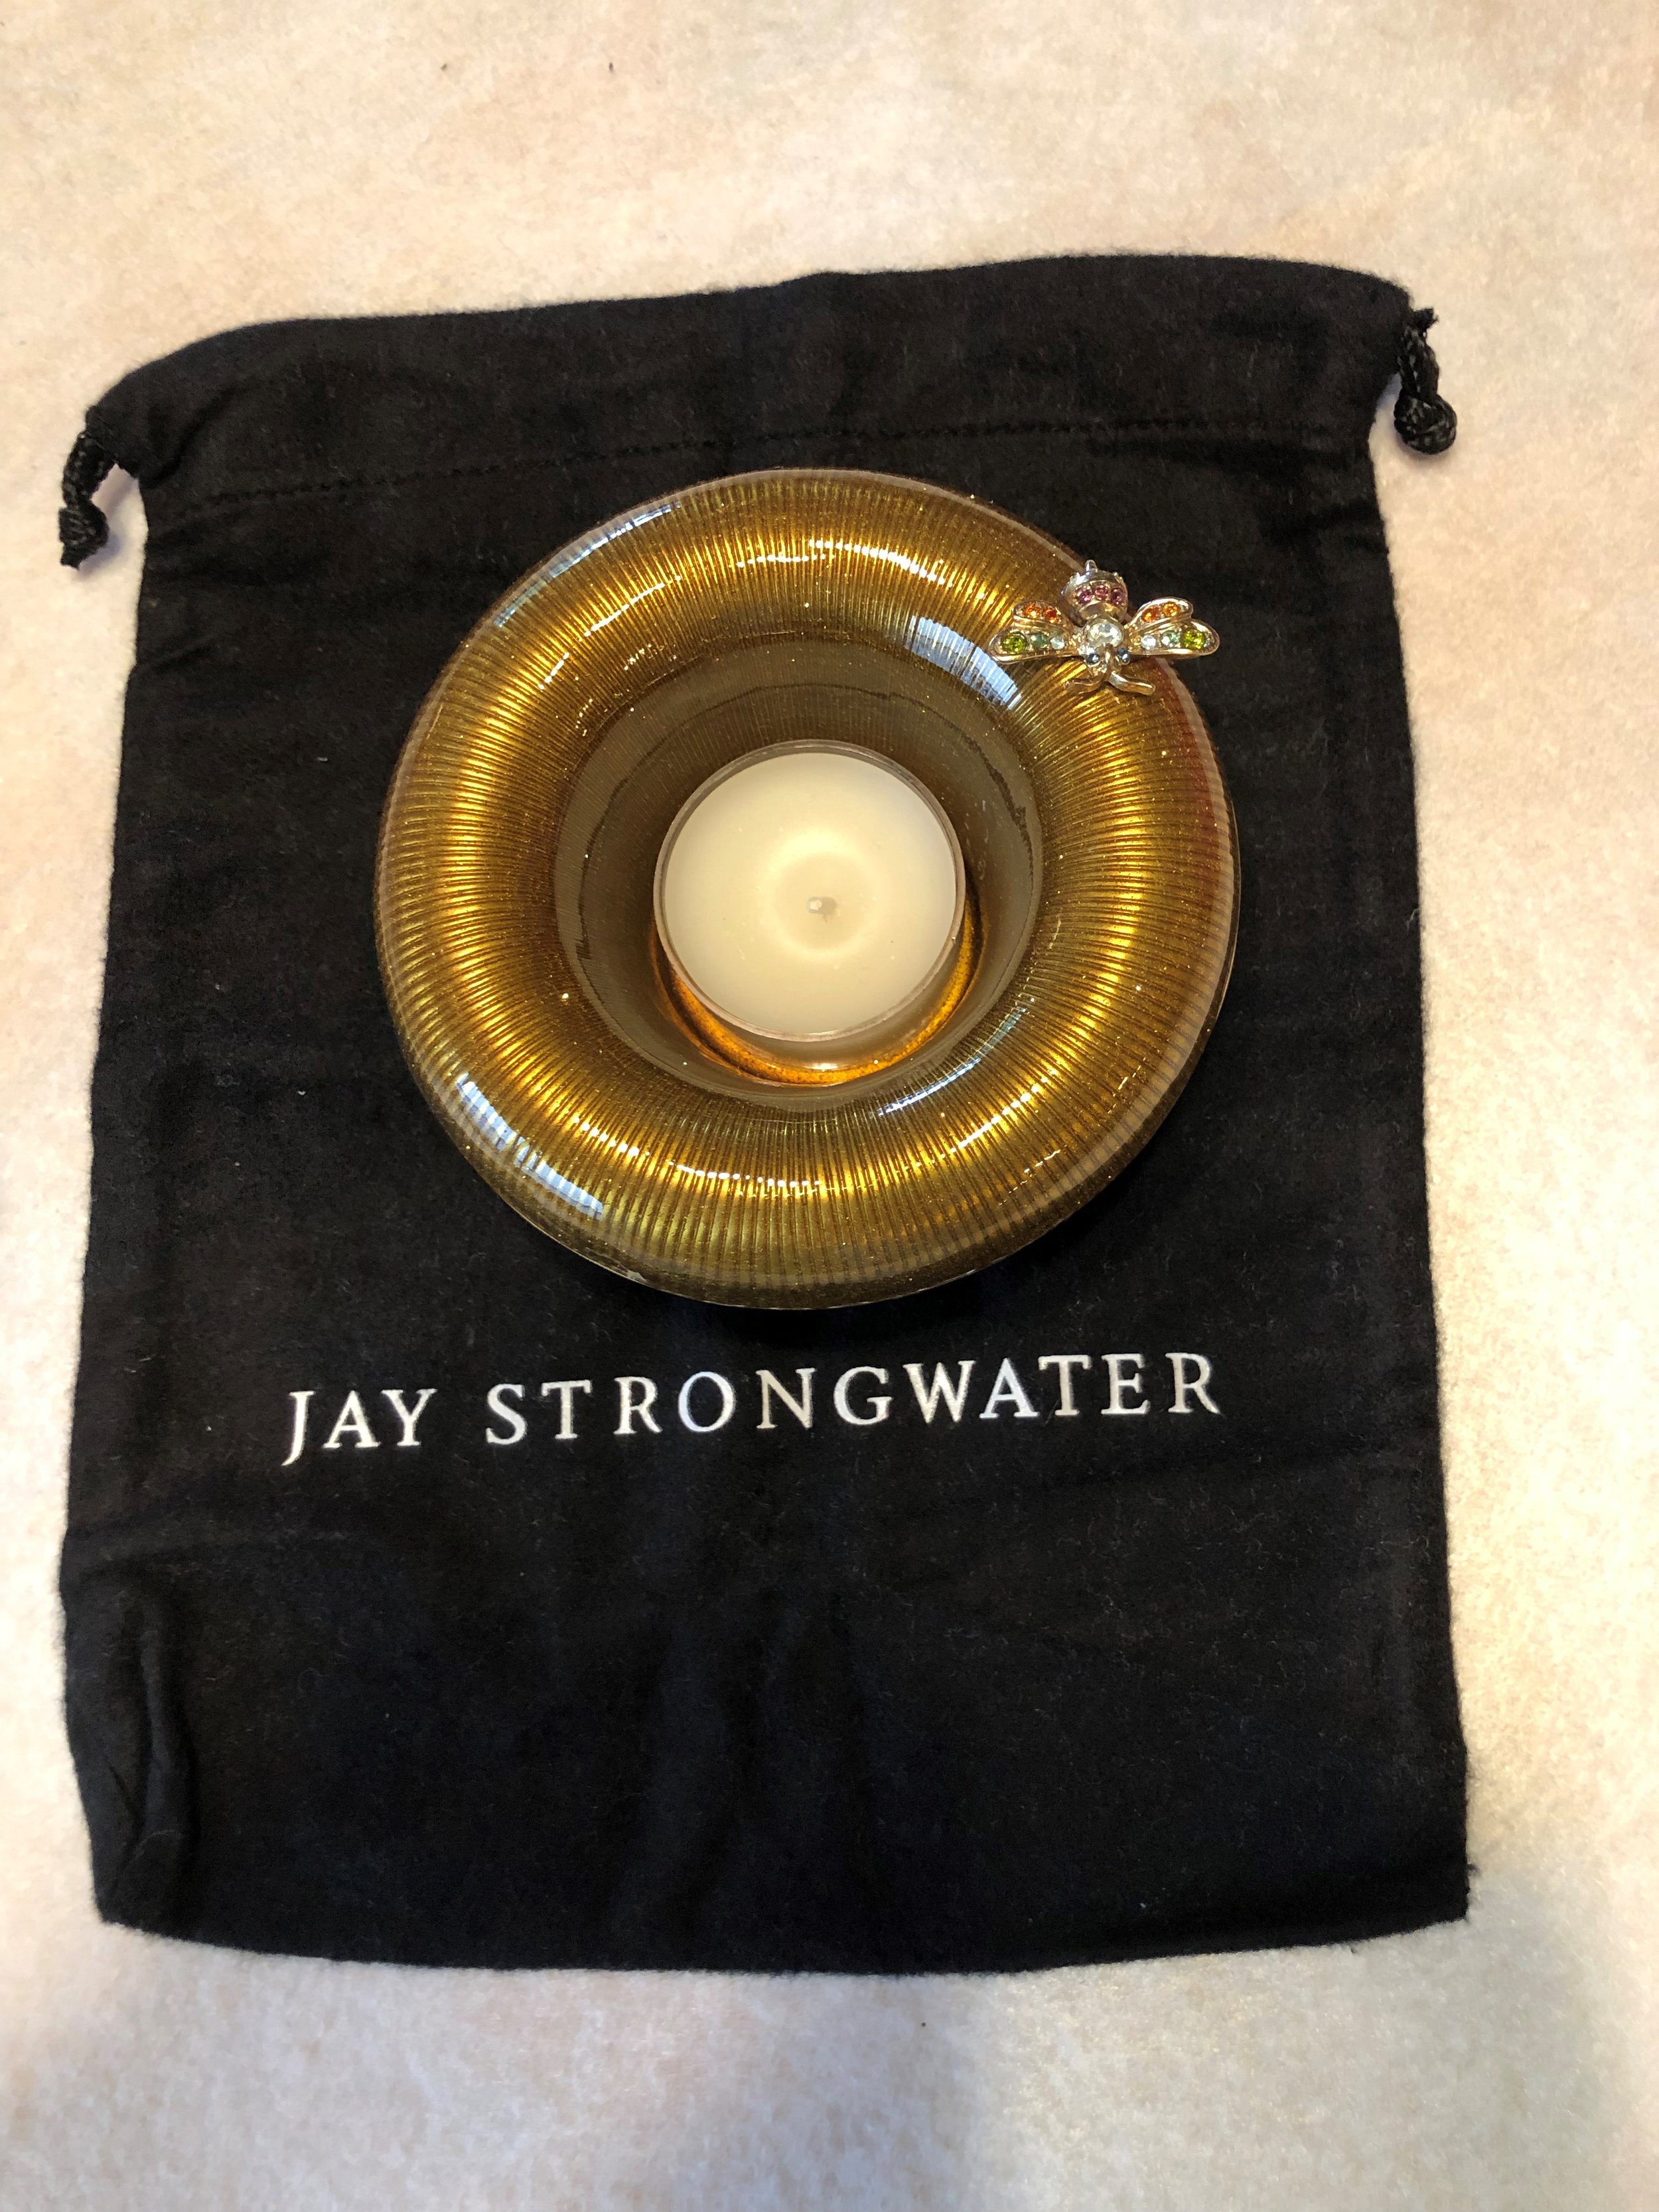 Jay Strongwater Candle.jpg